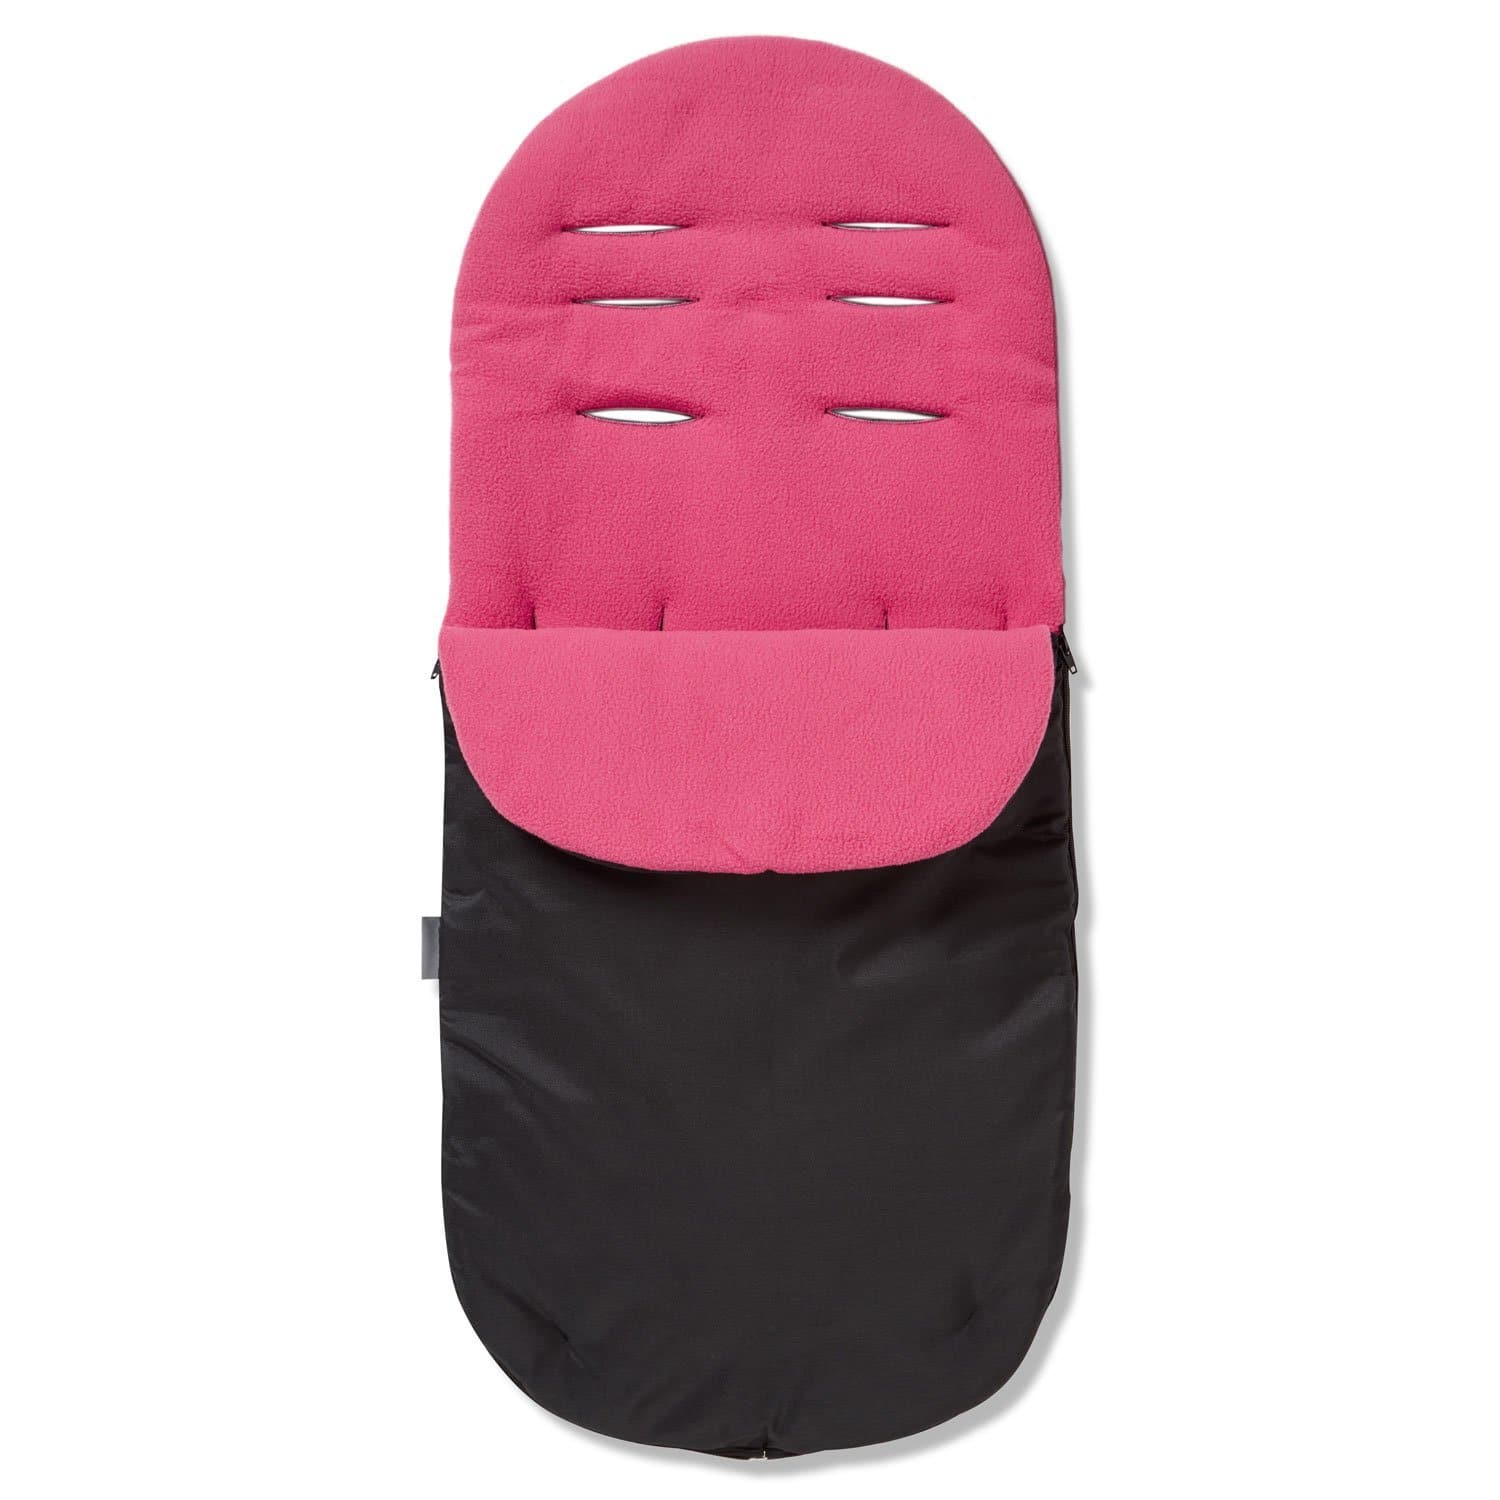 Footmuff / Cosy Toes Compatible with Cam - Dark Pink / Fits All Models | For Your Little One